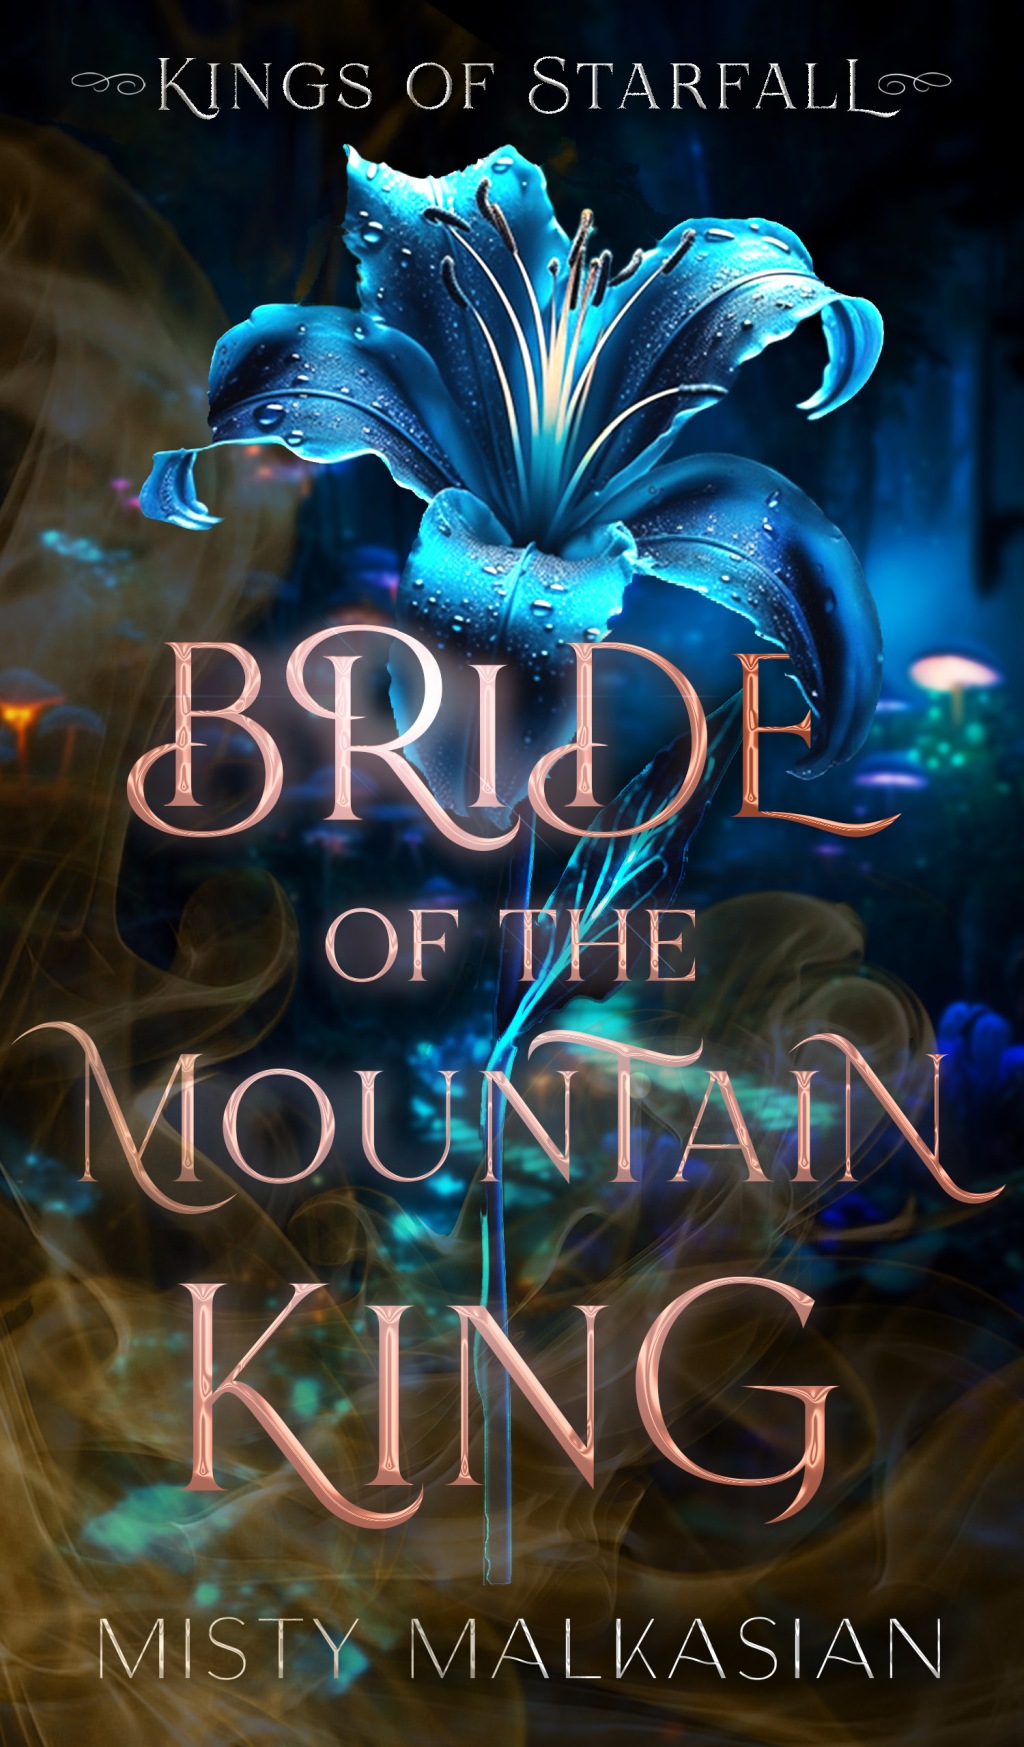 COVER REVEAL: BRIDE OF THE MOUNTAIN KING BY MISTY MALKASIAN (KINGS OF STARFALL #1)